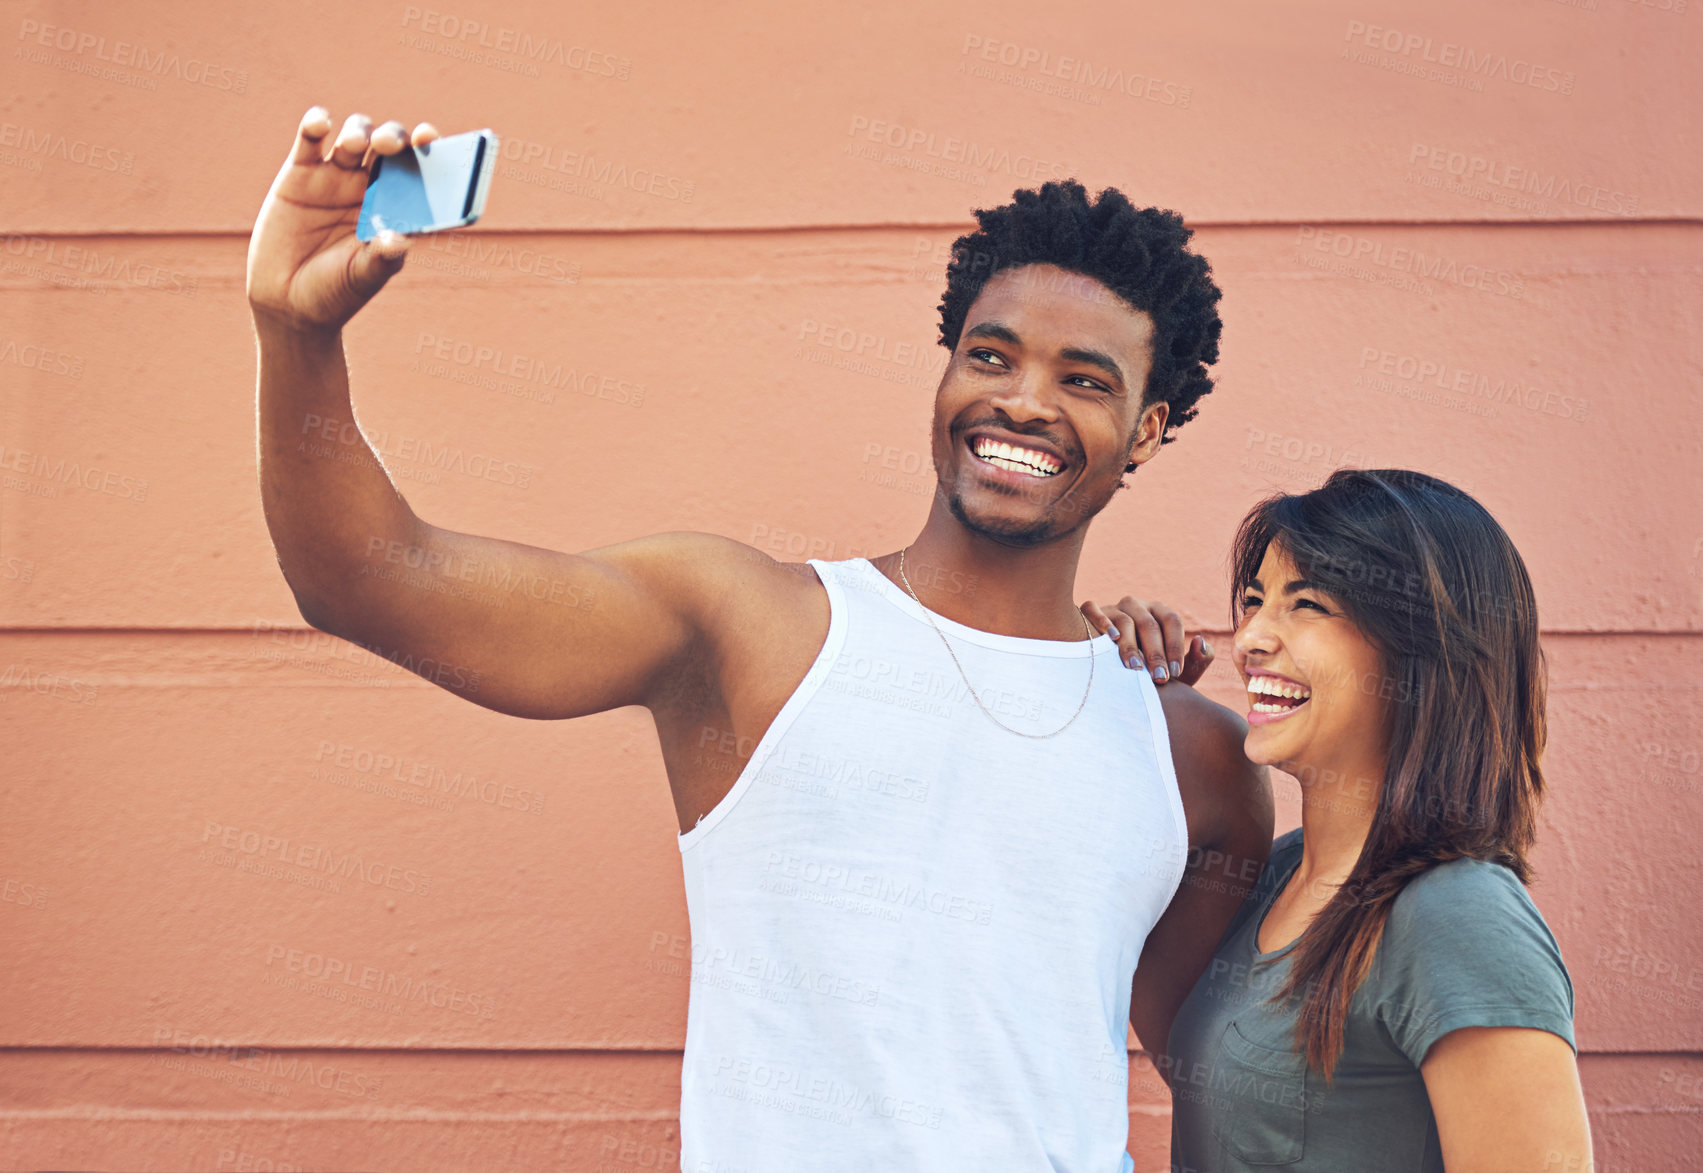 Buy stock photo Shot of a young couple taking a selfie together